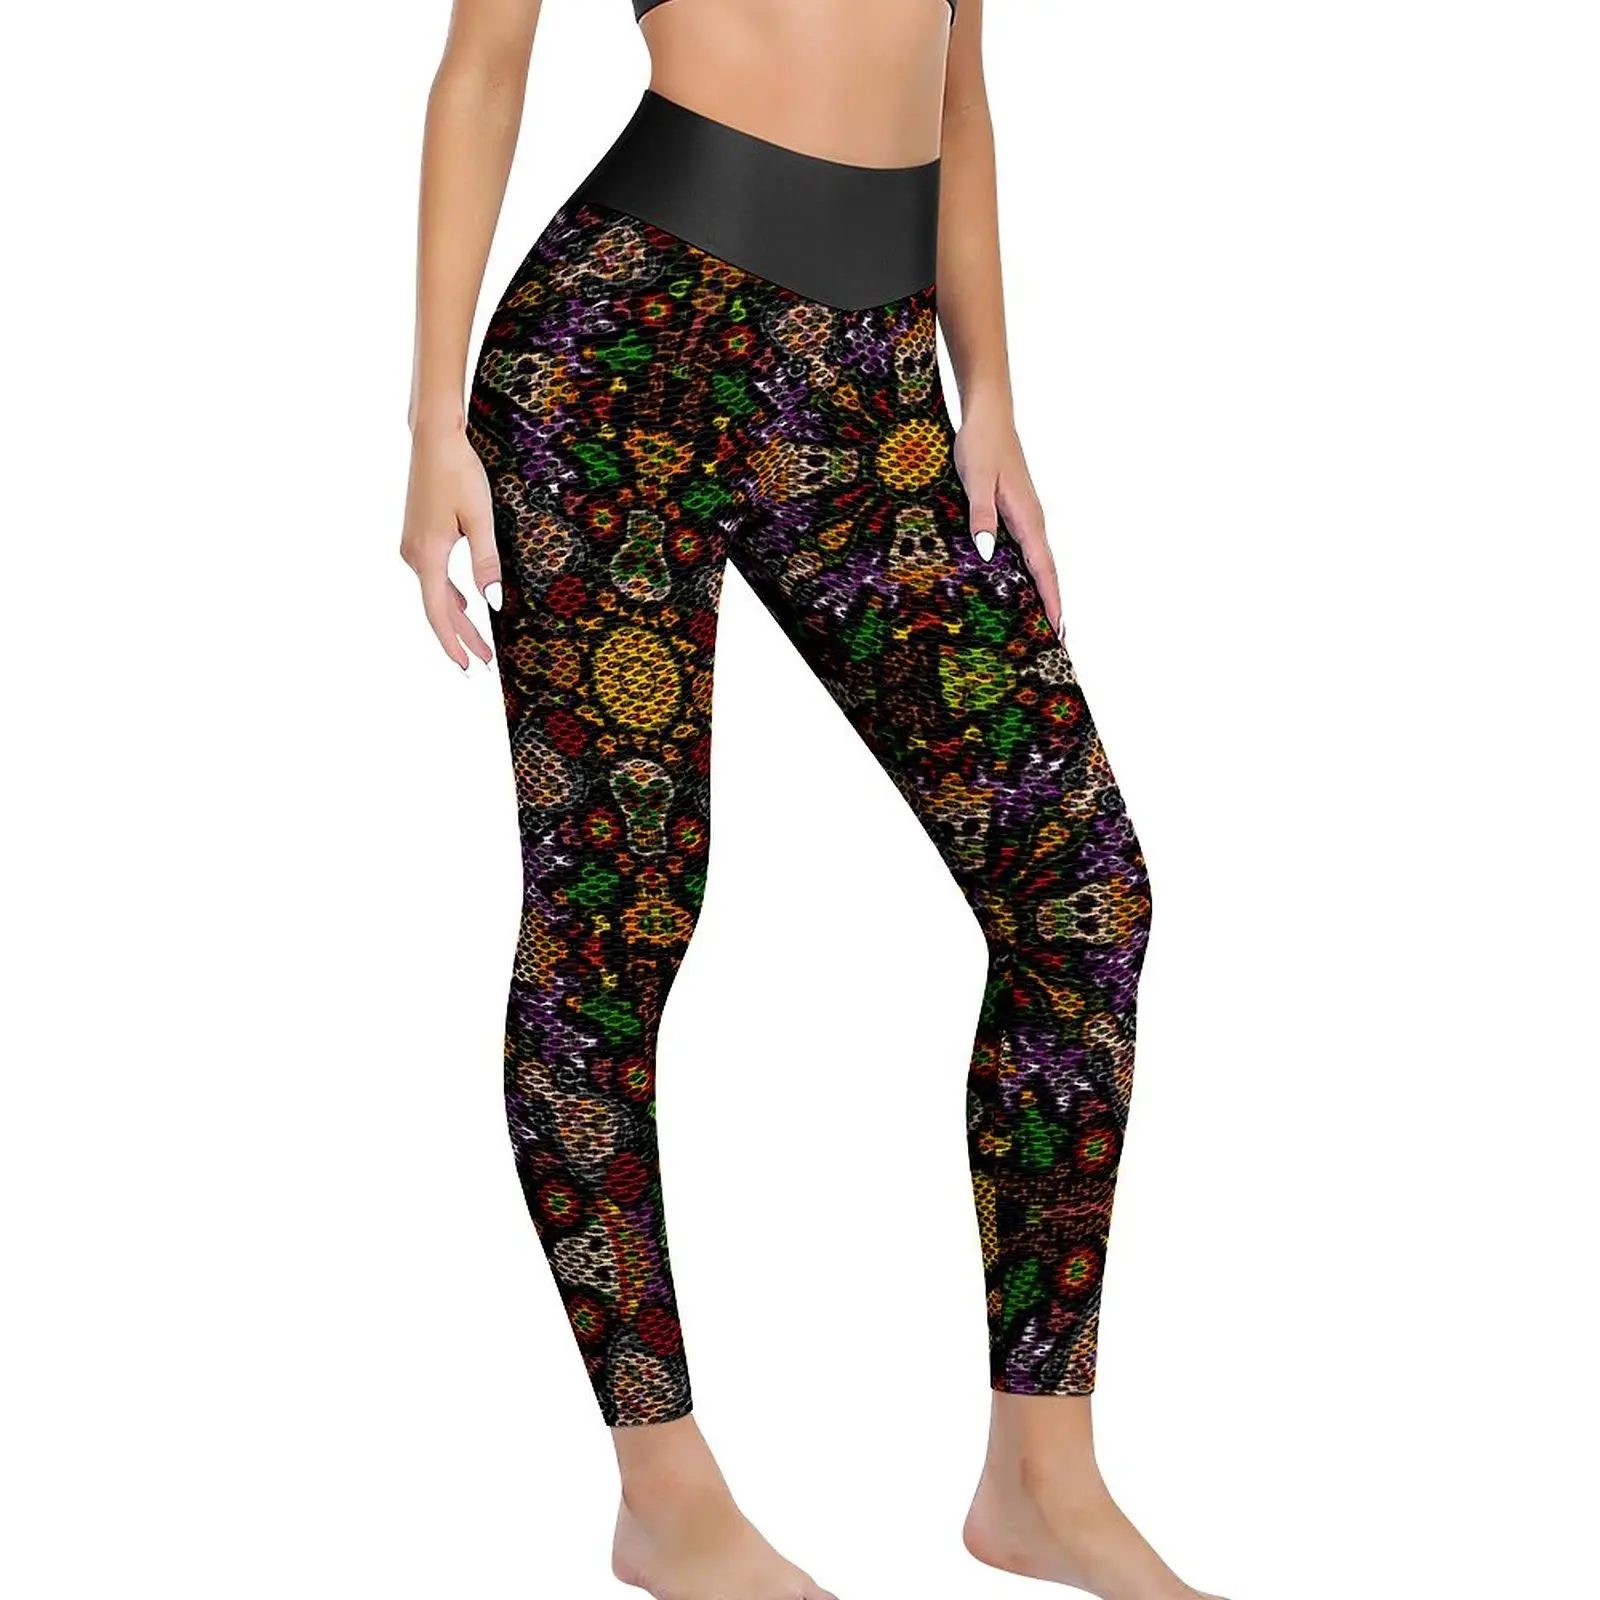 

Abstract Mandala Print Yoga Pants Sexy Mexican Style Graphic Leggings High Waist Workout Leggins Retro Stretchy Sports Tights